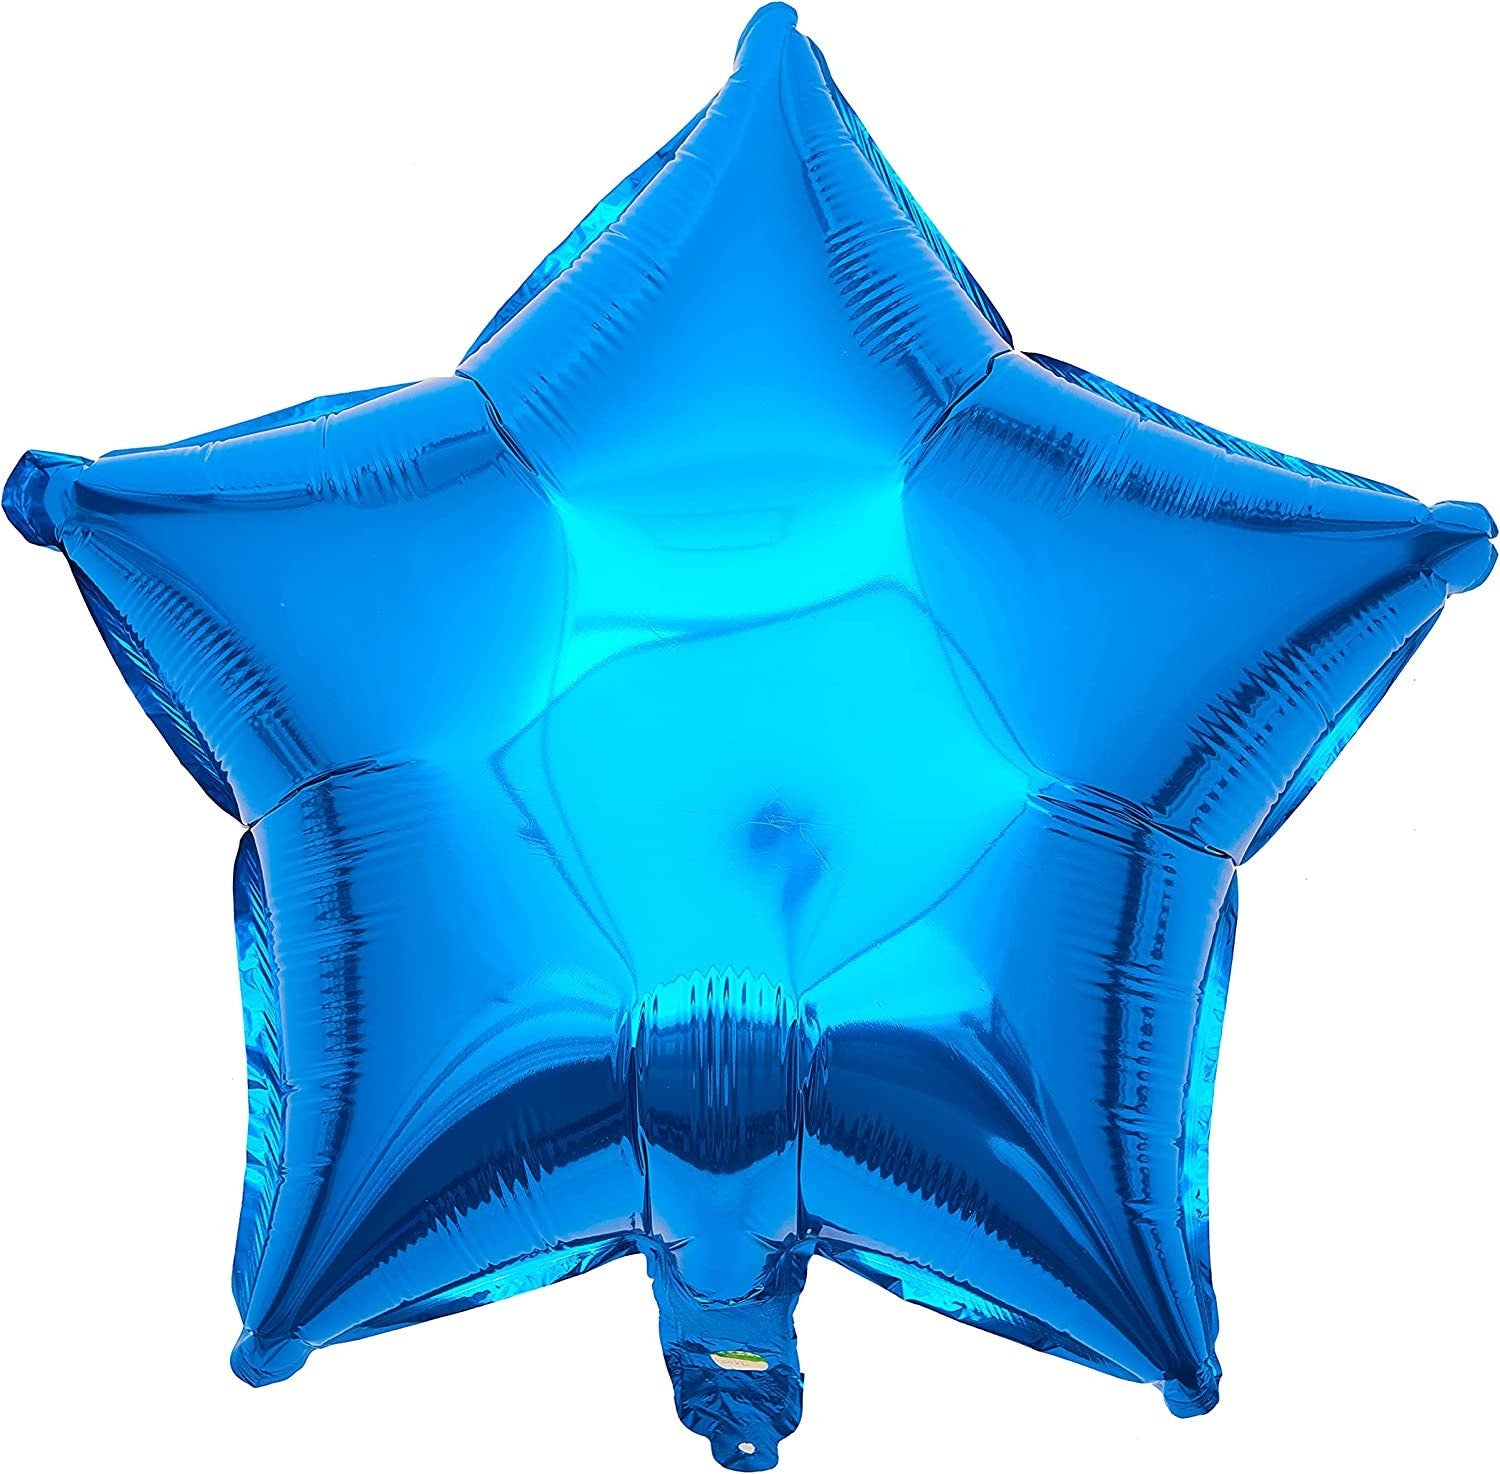 18 Inch Foil Blue Star Balloons - Perfect for Adding Sparkle to Your Celebrations!